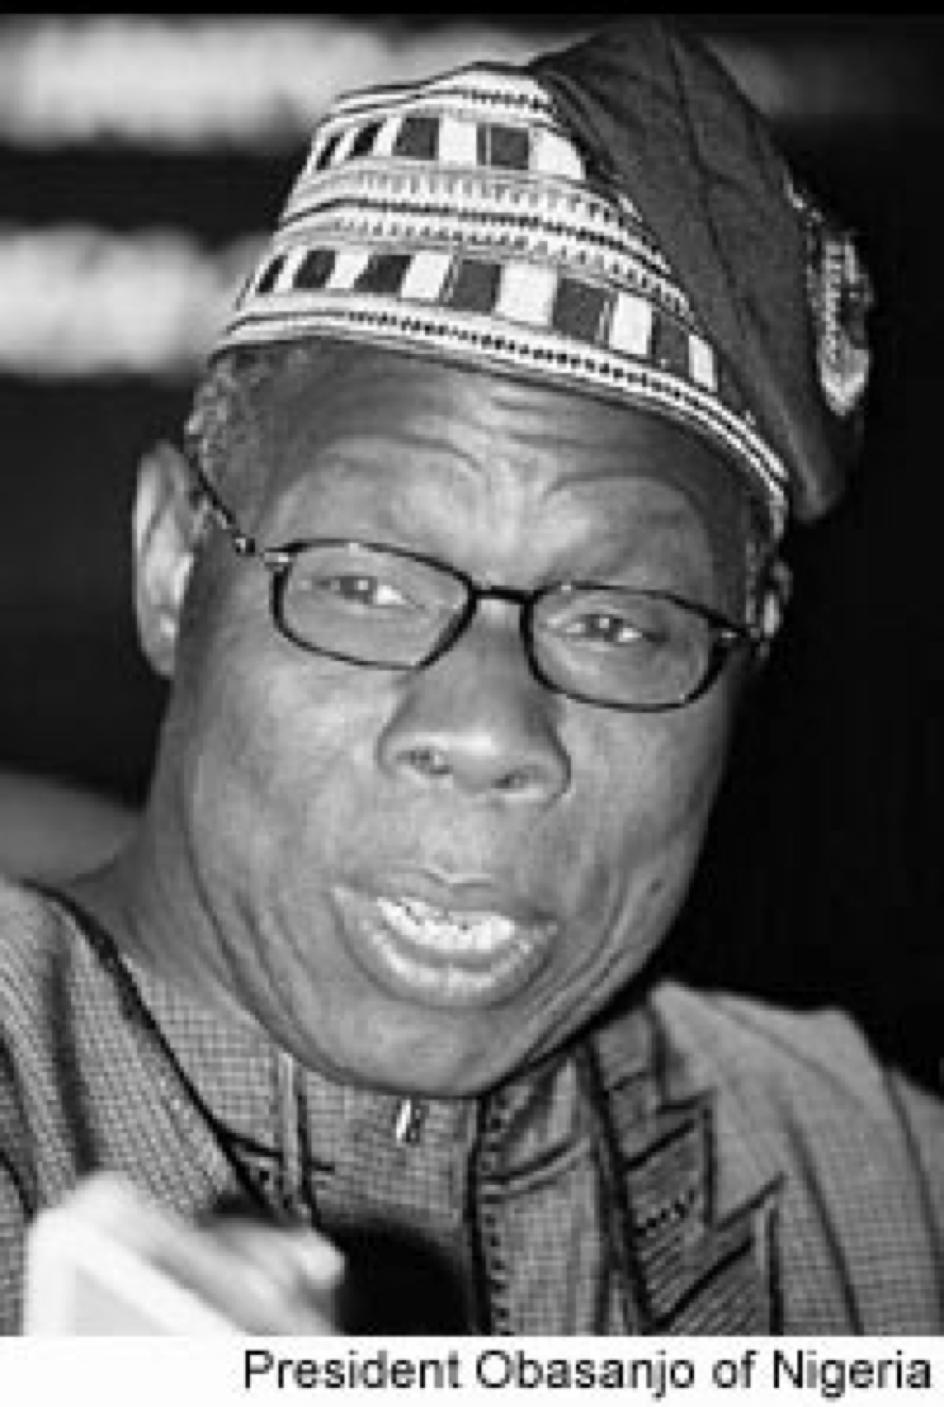 Organization of the 4th Republic: The Federal Executive President Idea of a strong, directly-elected President intended to be a unifying factor in Nigeria President Obasanjo (1999- ): sought